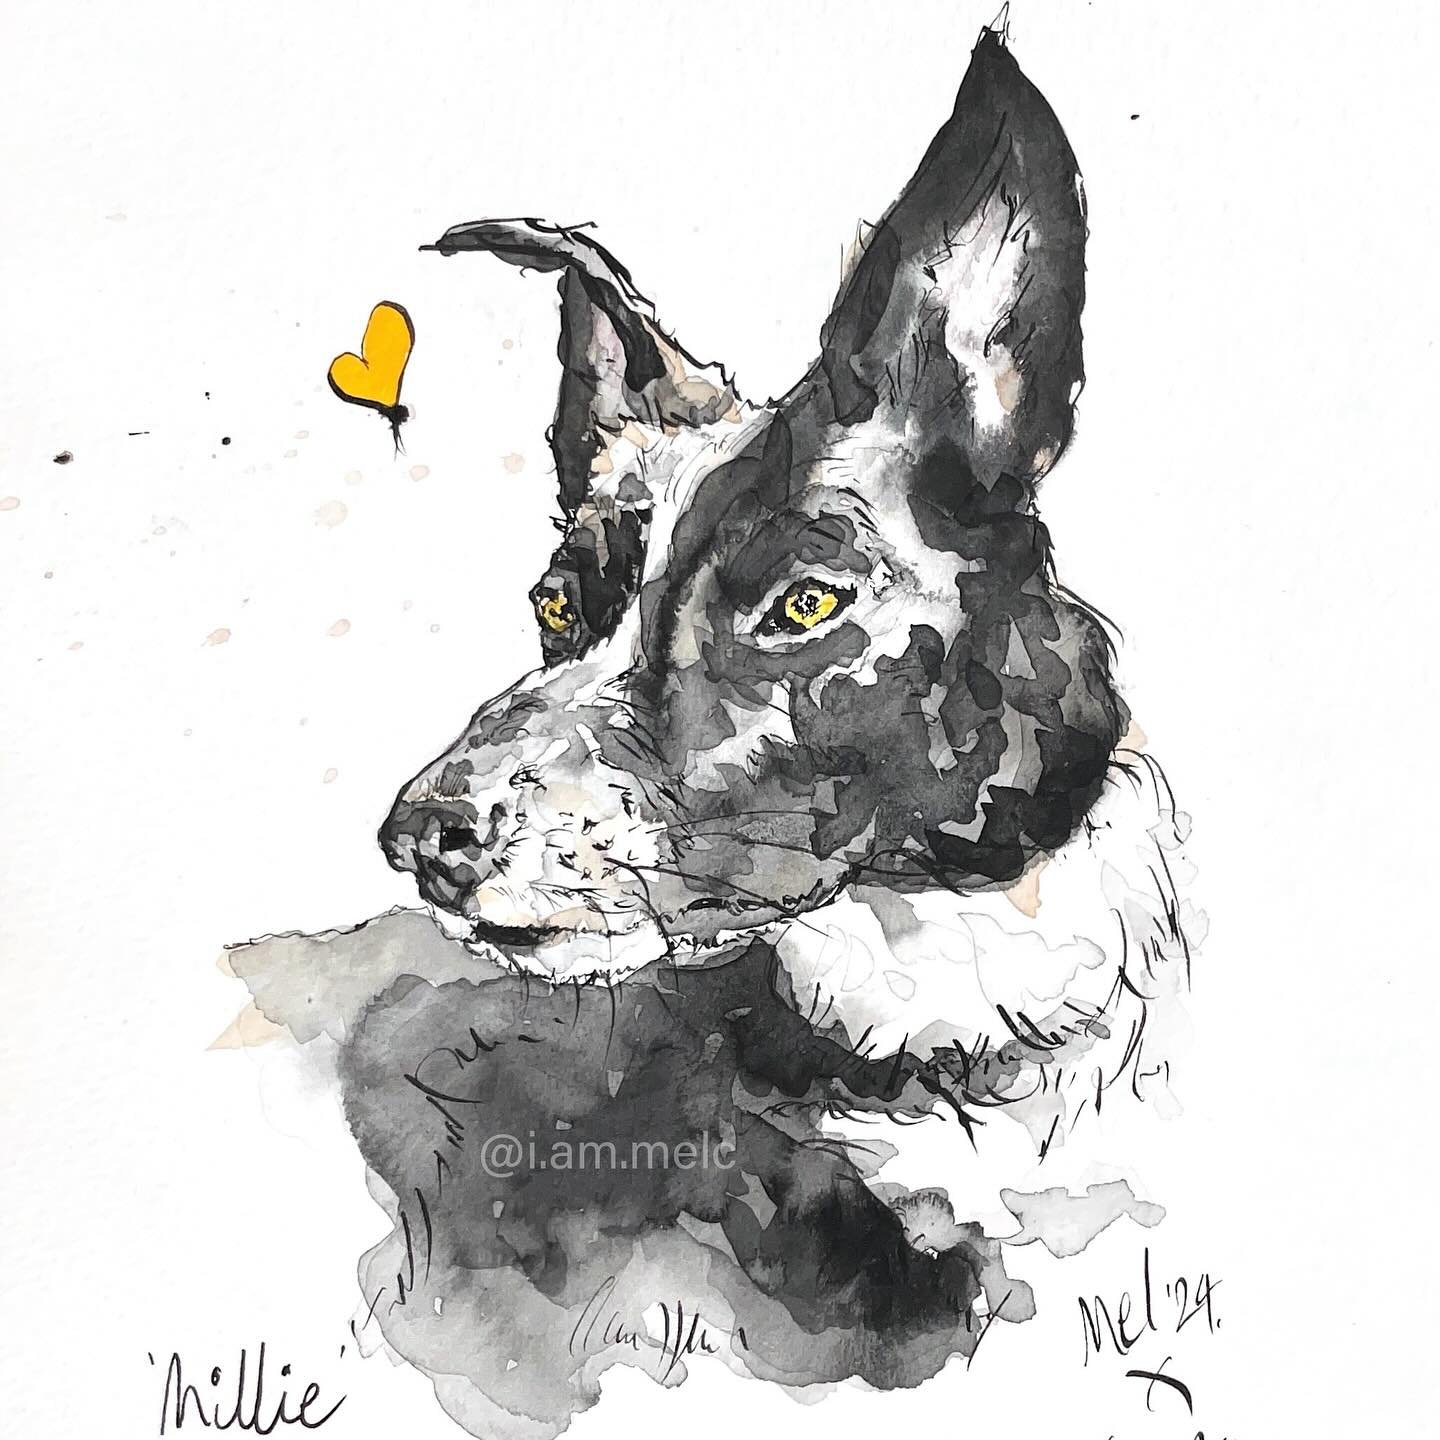 Millie. Collected yesterday. The kindest gift, don&rsquo;t you think? 🖋️🐾&hearts;️
&bull;
&bull;
#petportrait #illustration #giftideas #dogart #artist #dailyart #inkandwash #art #petart #doglovers